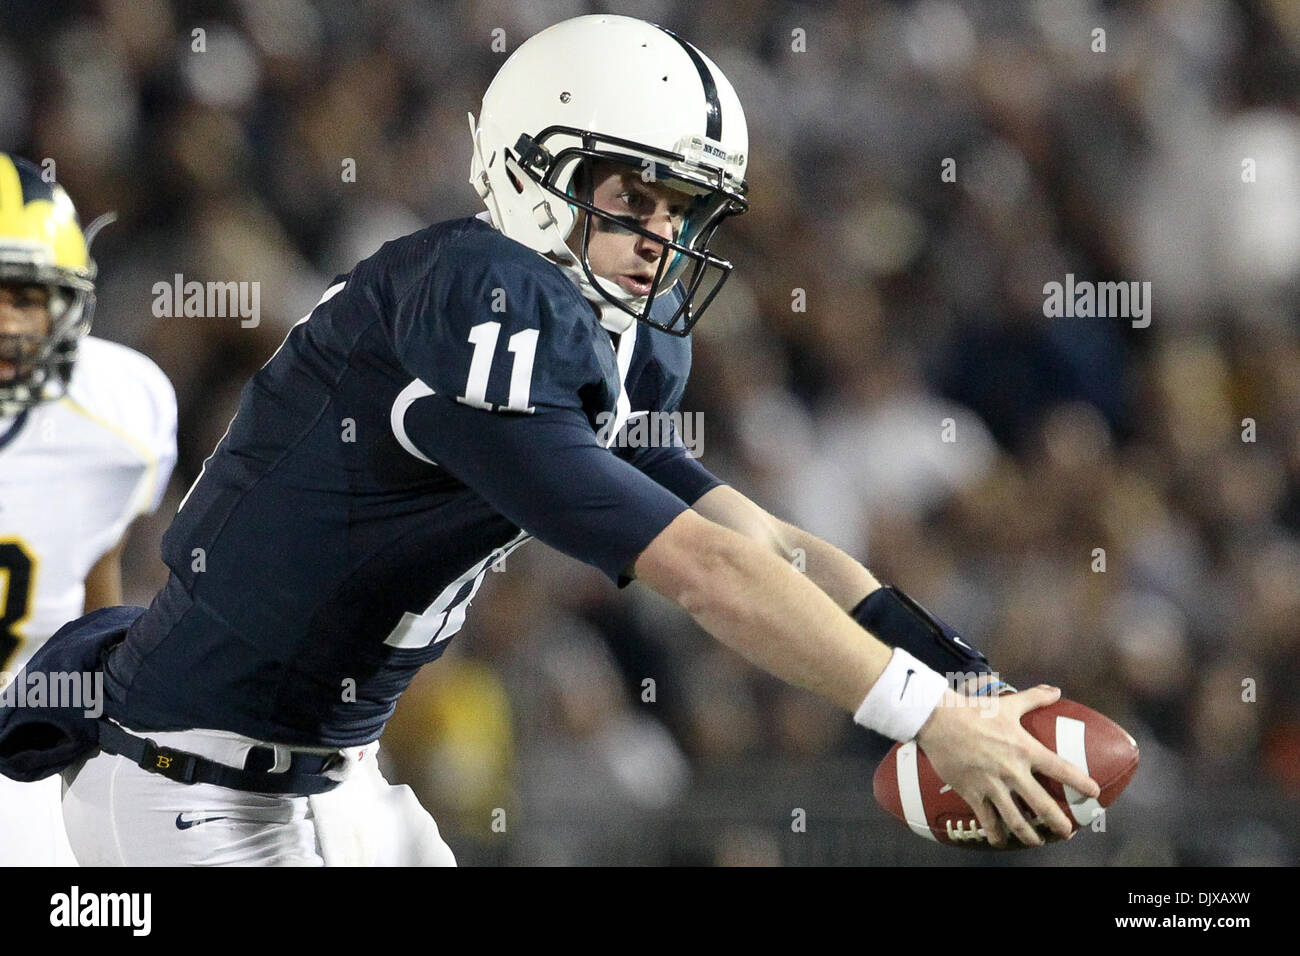 Oct. 30, 2010 - State College, Pennsylvania, United States of America - Penn State Nittany Lions quarterback Matthew McGloin (11)in action in the game held at Beaver Stadum in State College, Pennsylvania. (Credit Image: © Alex Cena/Southcreek Global/ZUMApress.com) Stock Photo